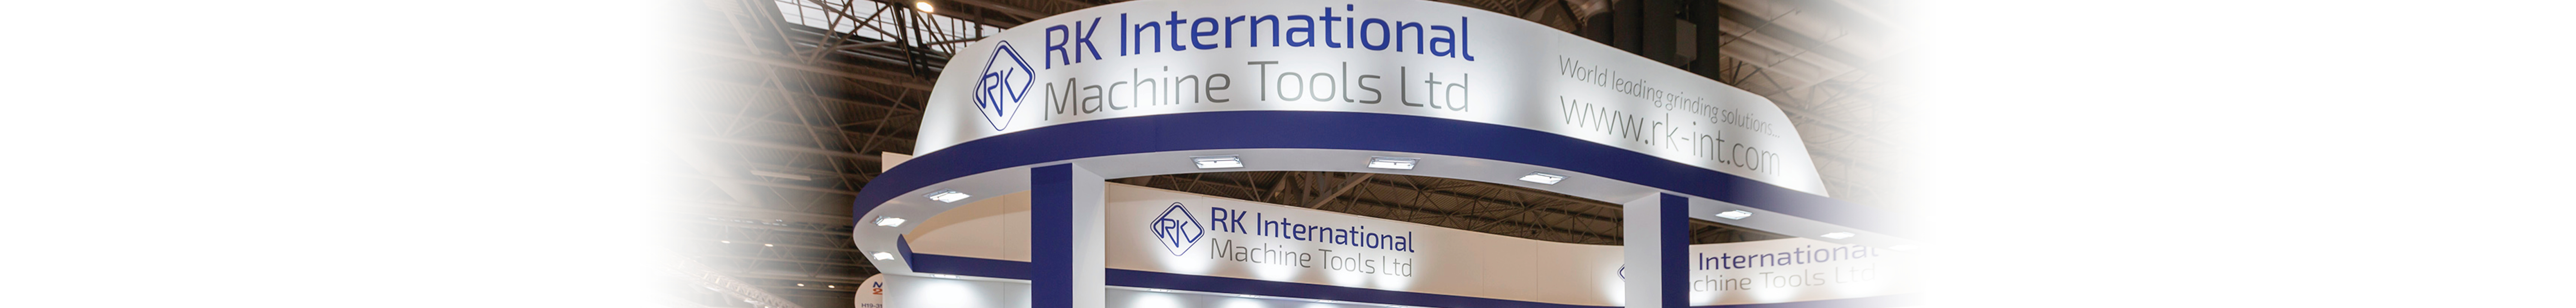 Exhibitions - Where to find RK and our partners...